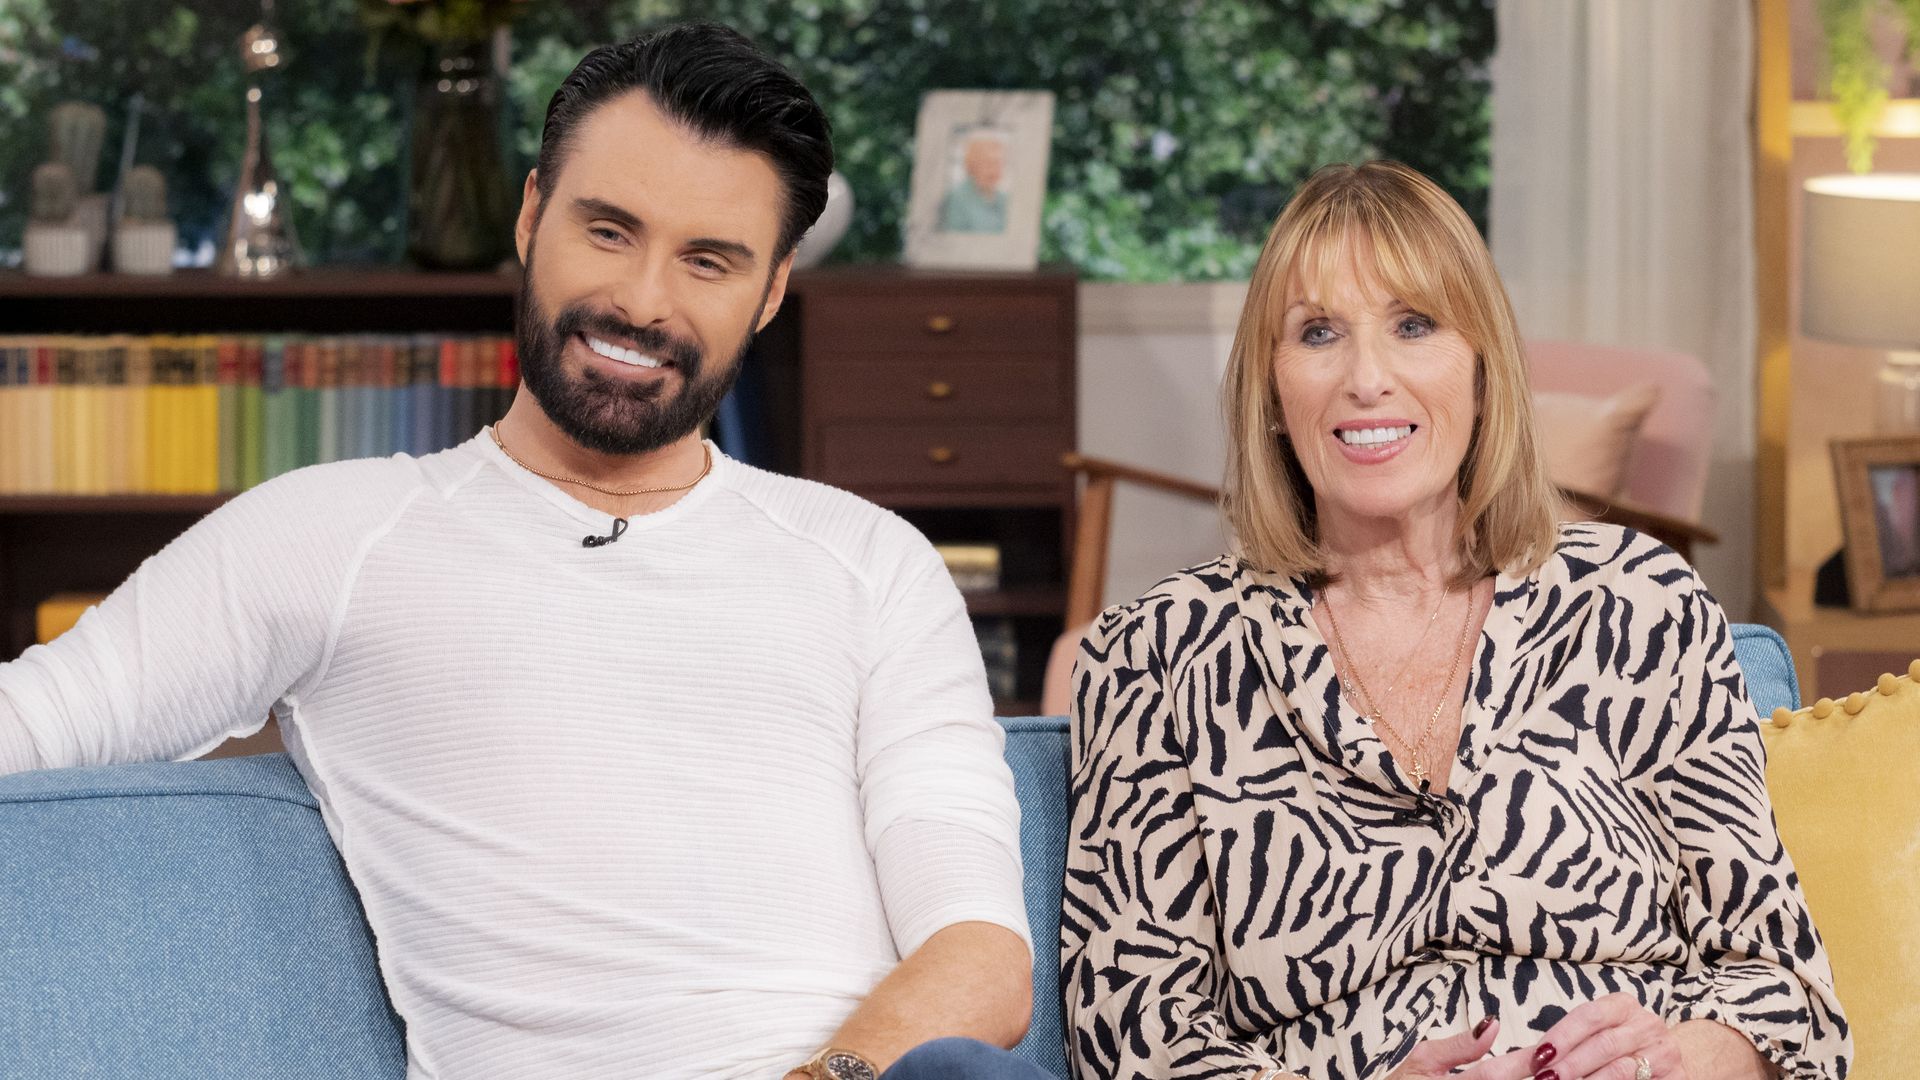 Rylan Clark and his mum sat on a sofa